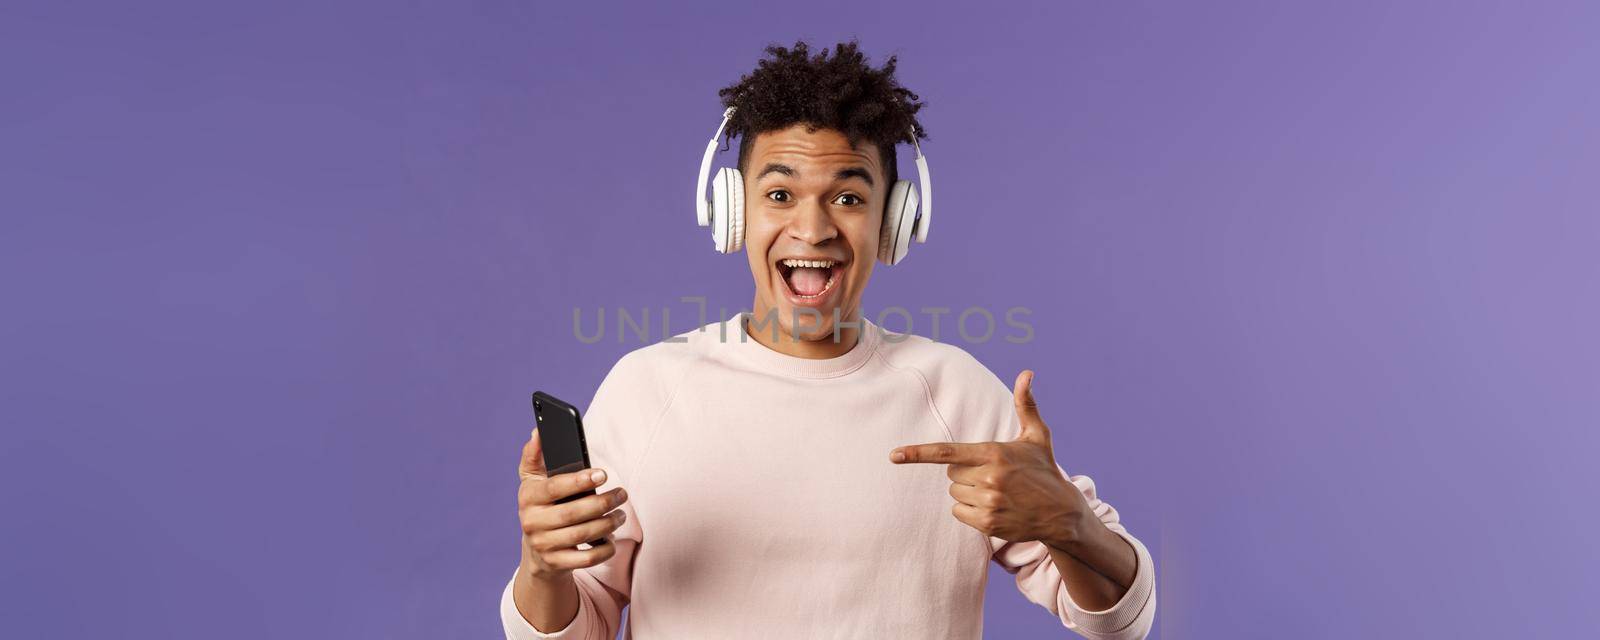 Technology and lifestyle concept. Portrait of happy, cheerful young man recommend awesome podcast or online music platform, buying subscribtion listen songs anytime, wear headphones, point at phone.